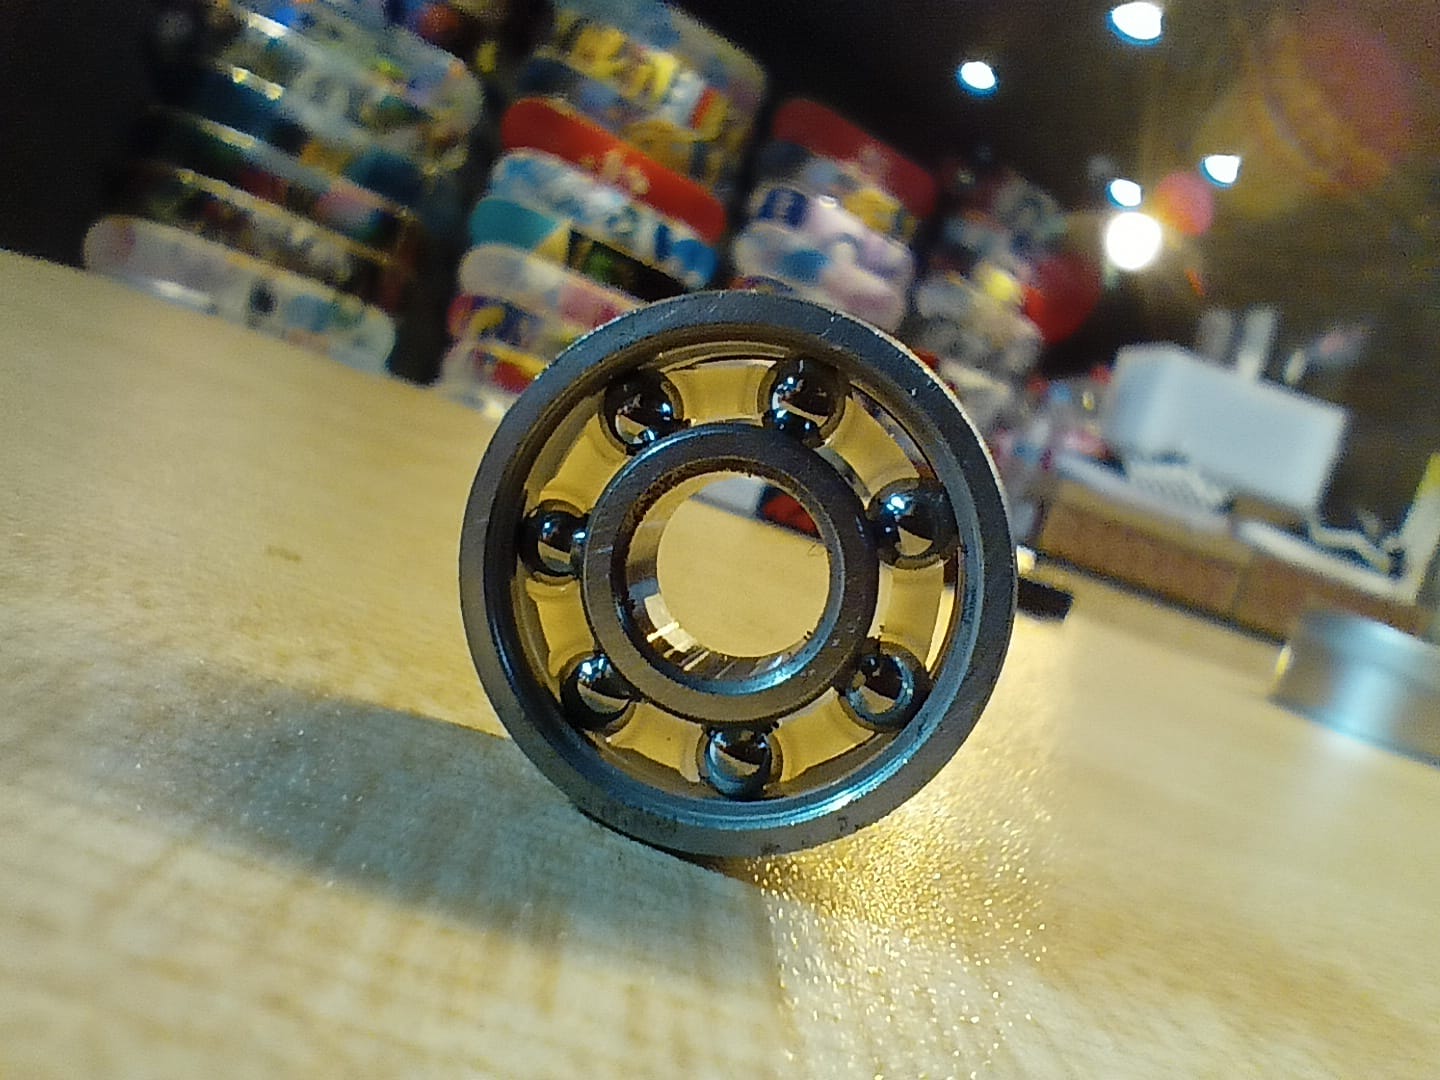 The ABEC 7 rating of the bearings provides accurate control and agility.